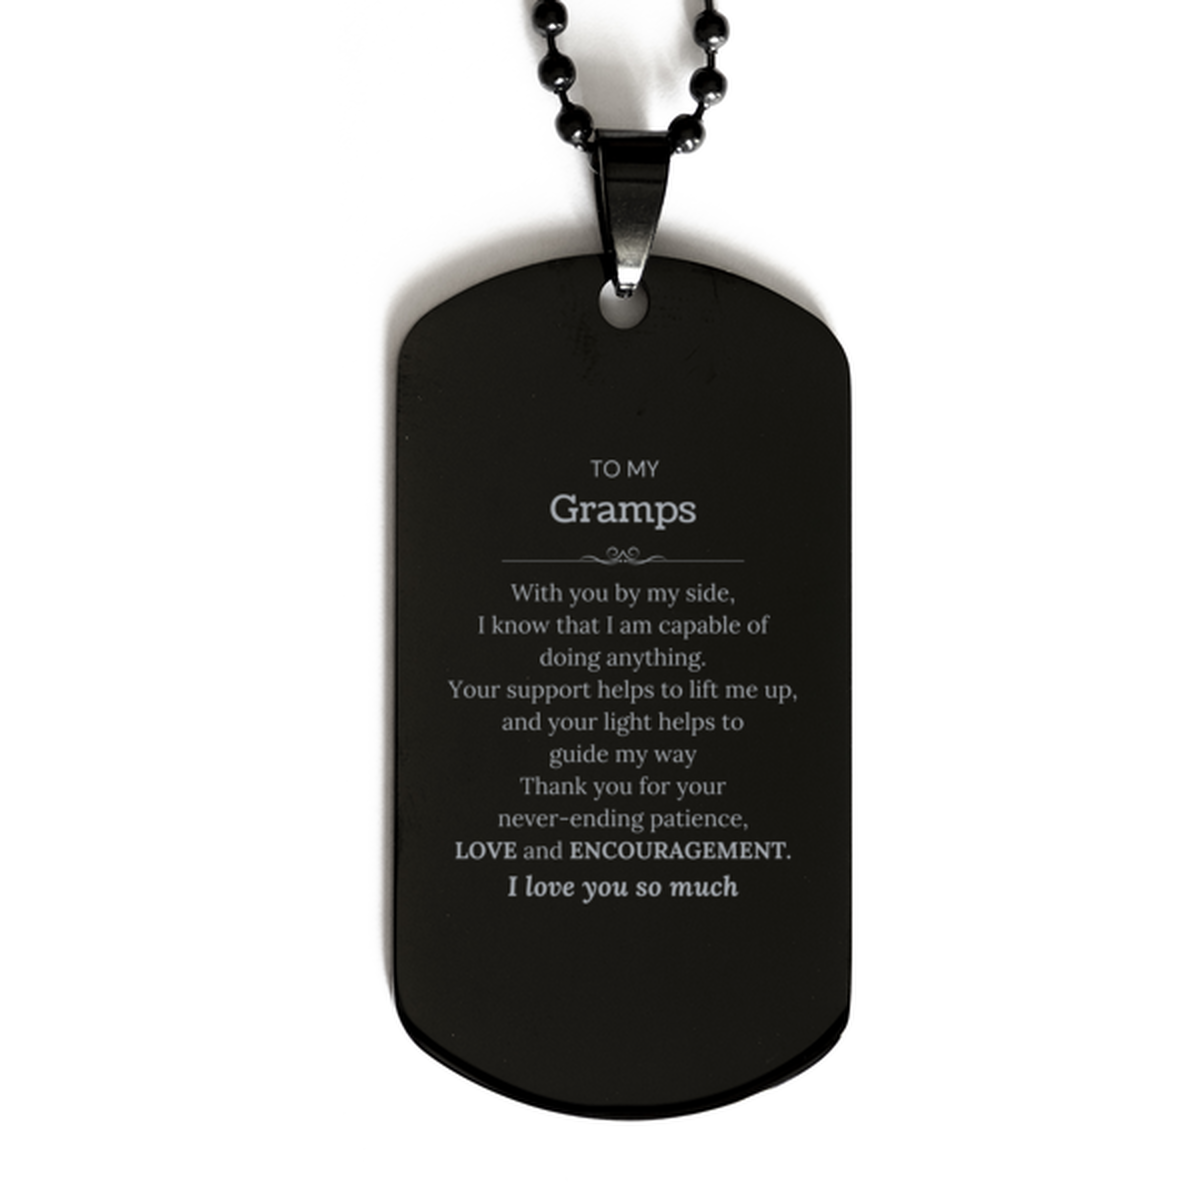 Appreciation Gramps Black Dog Tag Gifts, To My Gramps Birthday Christmas Wedding Keepsake Gifts for Gramps With you by my side, I know that I am capable of doing anything. I love you so much